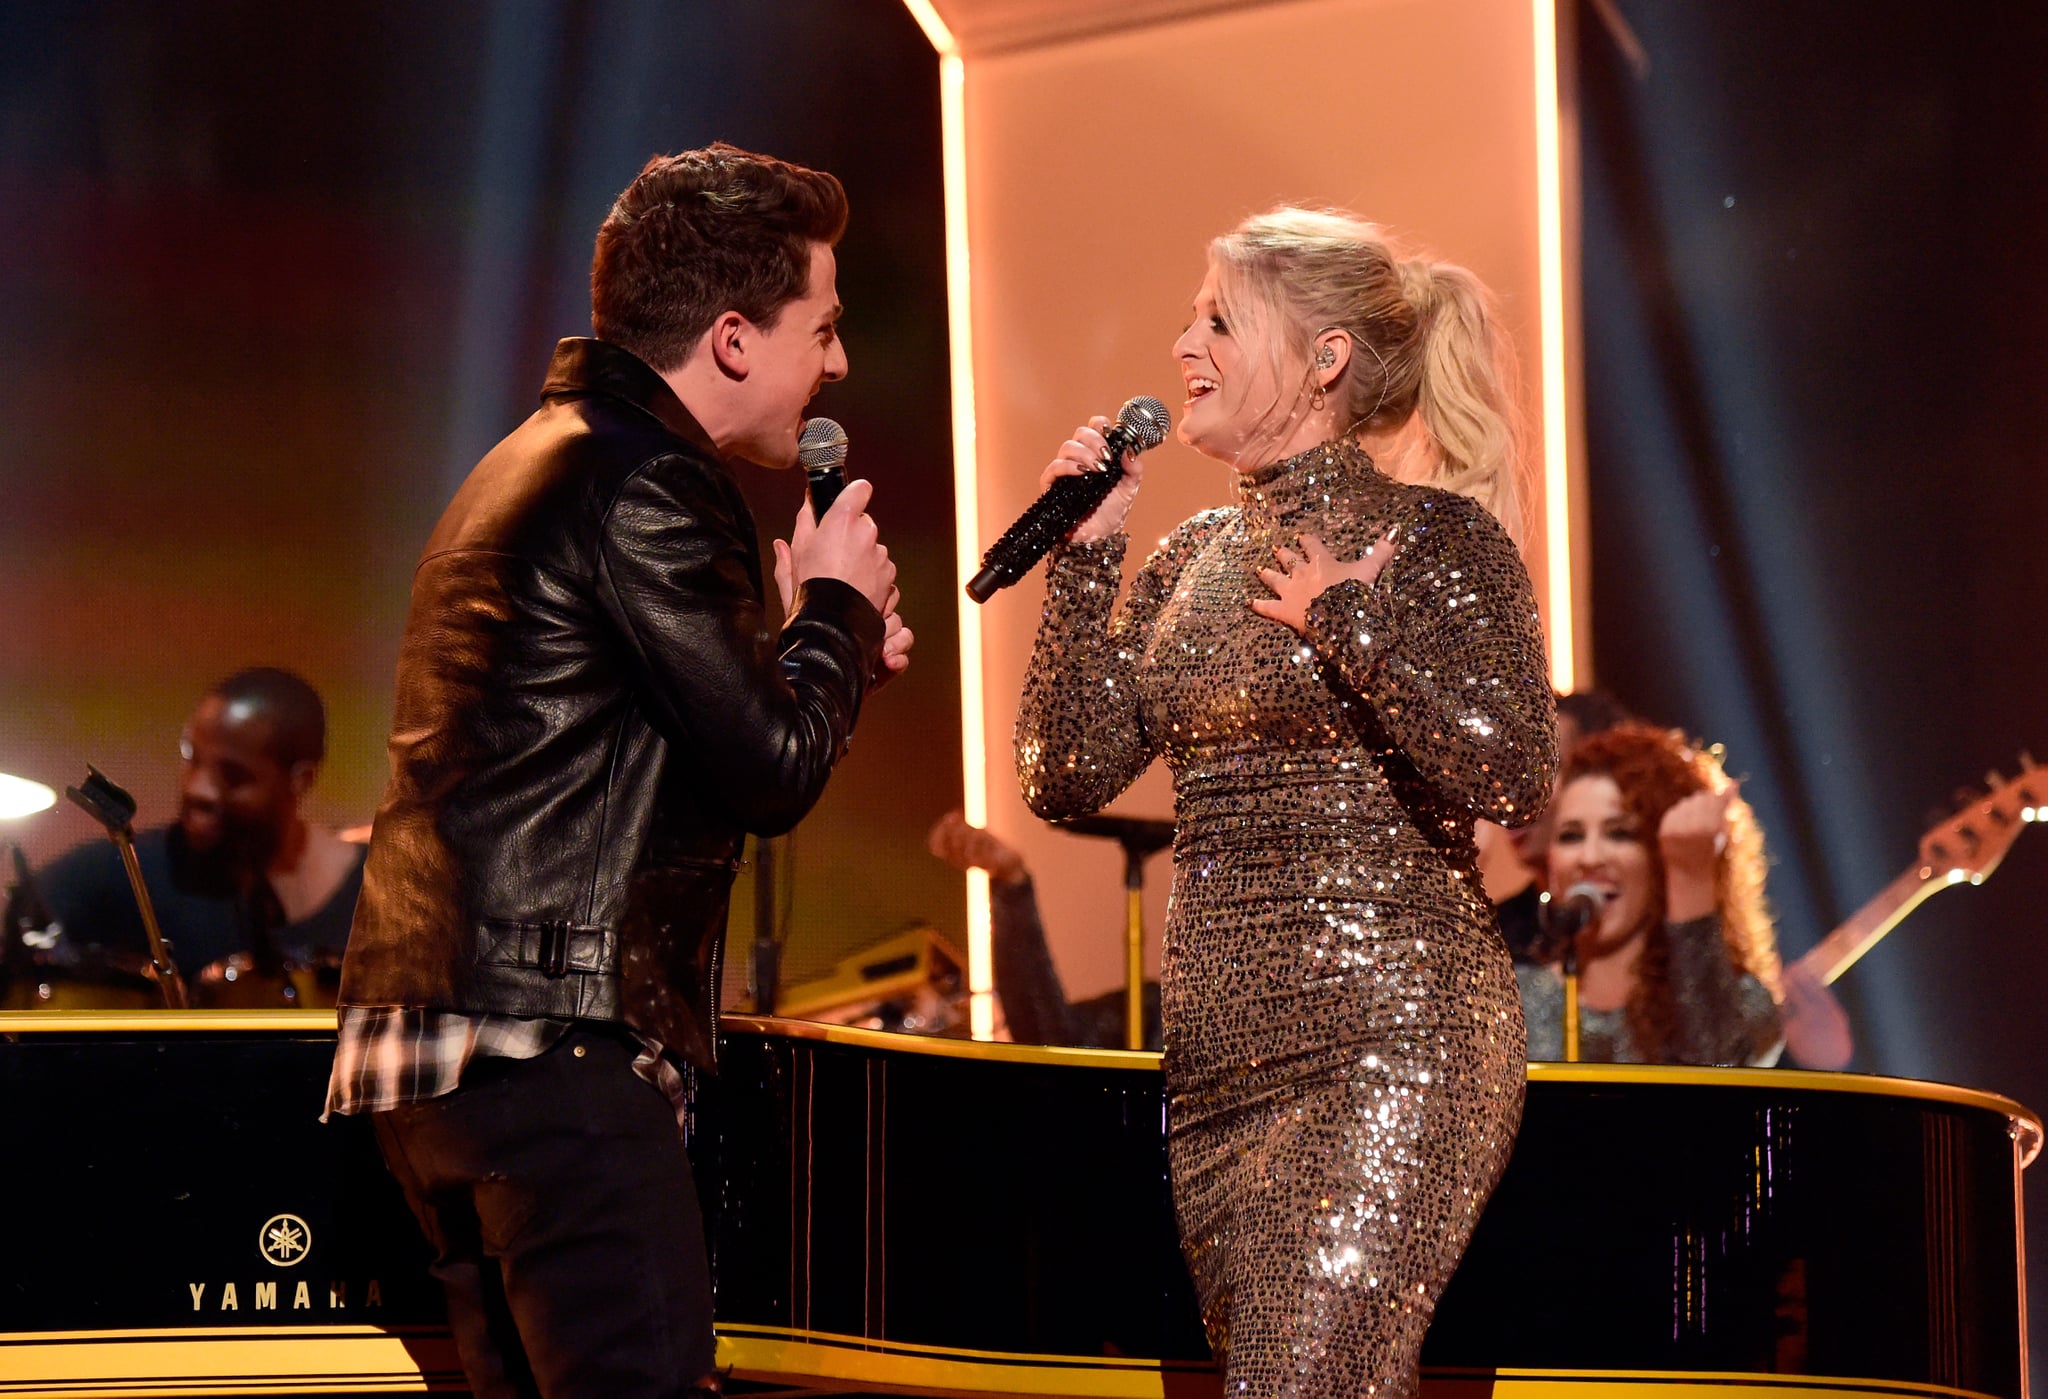 LOS ANGELES, CA - NOVEMBER 22:  Singers Charlie Puth (L) and Meghan Trainor perform onstage during the 2015 American Music Awards at Microsoft Theatre on November 22, 2015 in Los Angeles, California.  (Photo by Frazer Harrison/AMA2015/Getty Images for dcp)